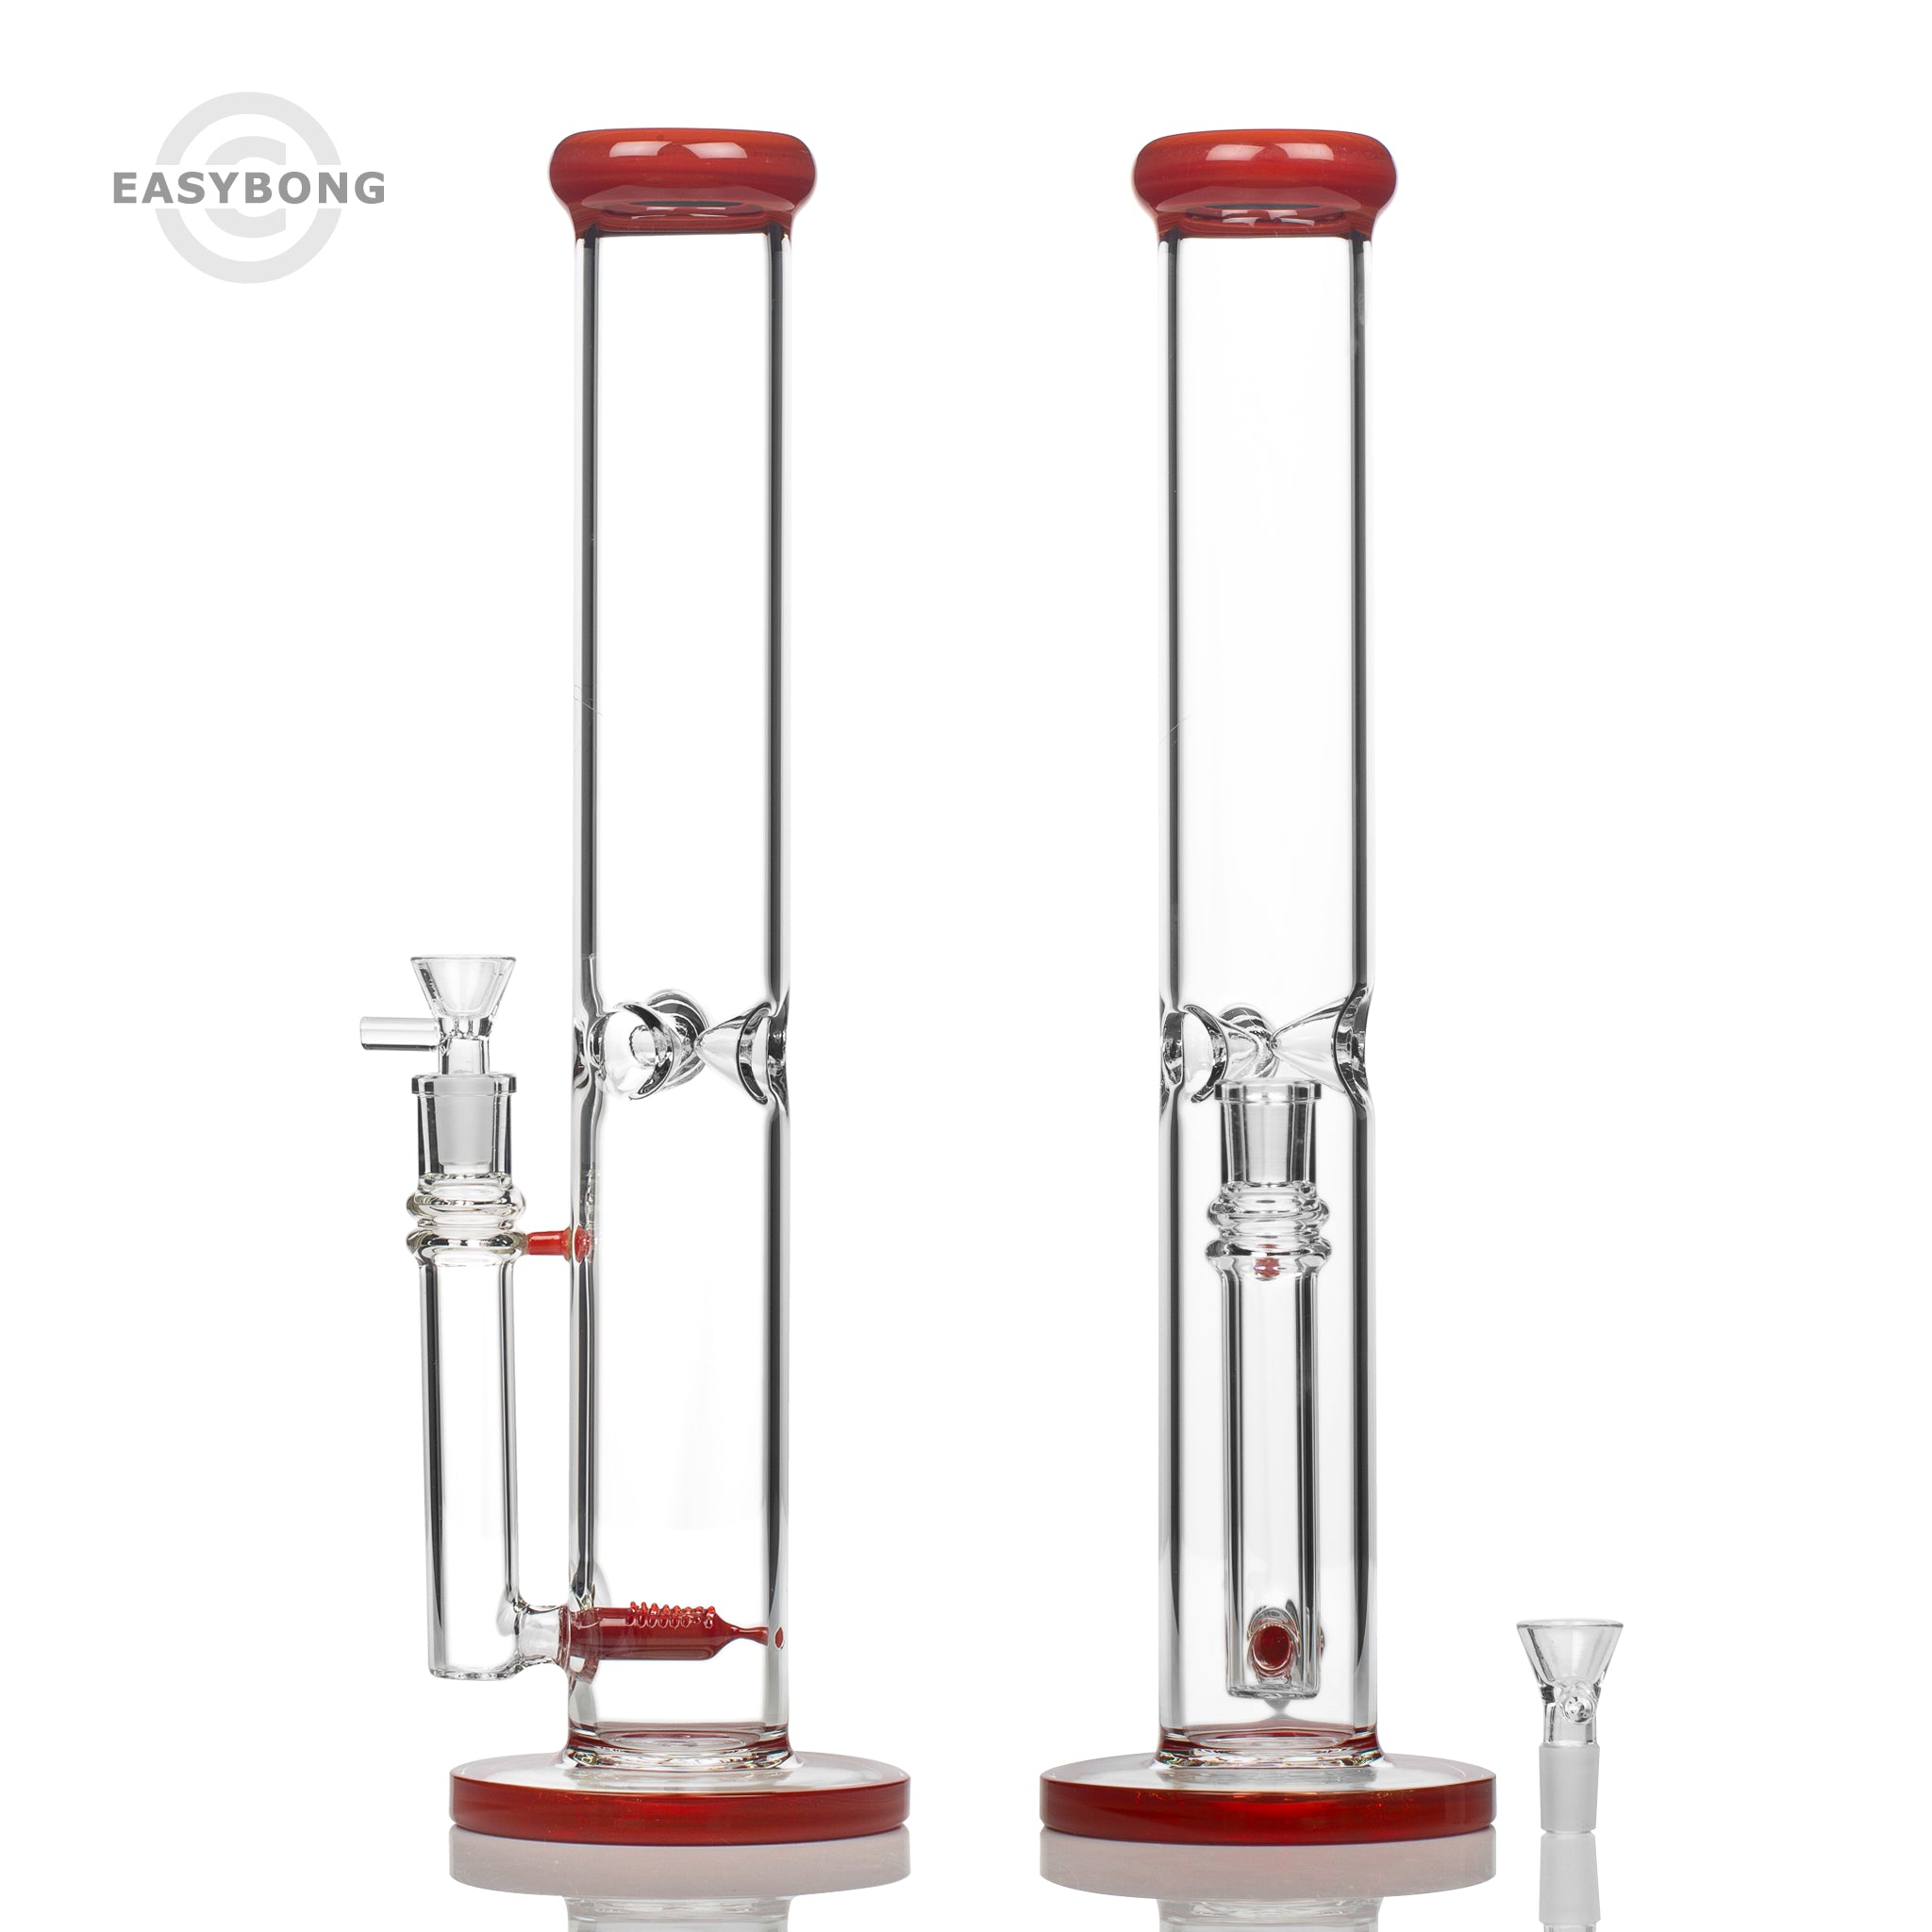 Tall and thick straight glass bongs with an inline diffuser for a smooth smoking experience.